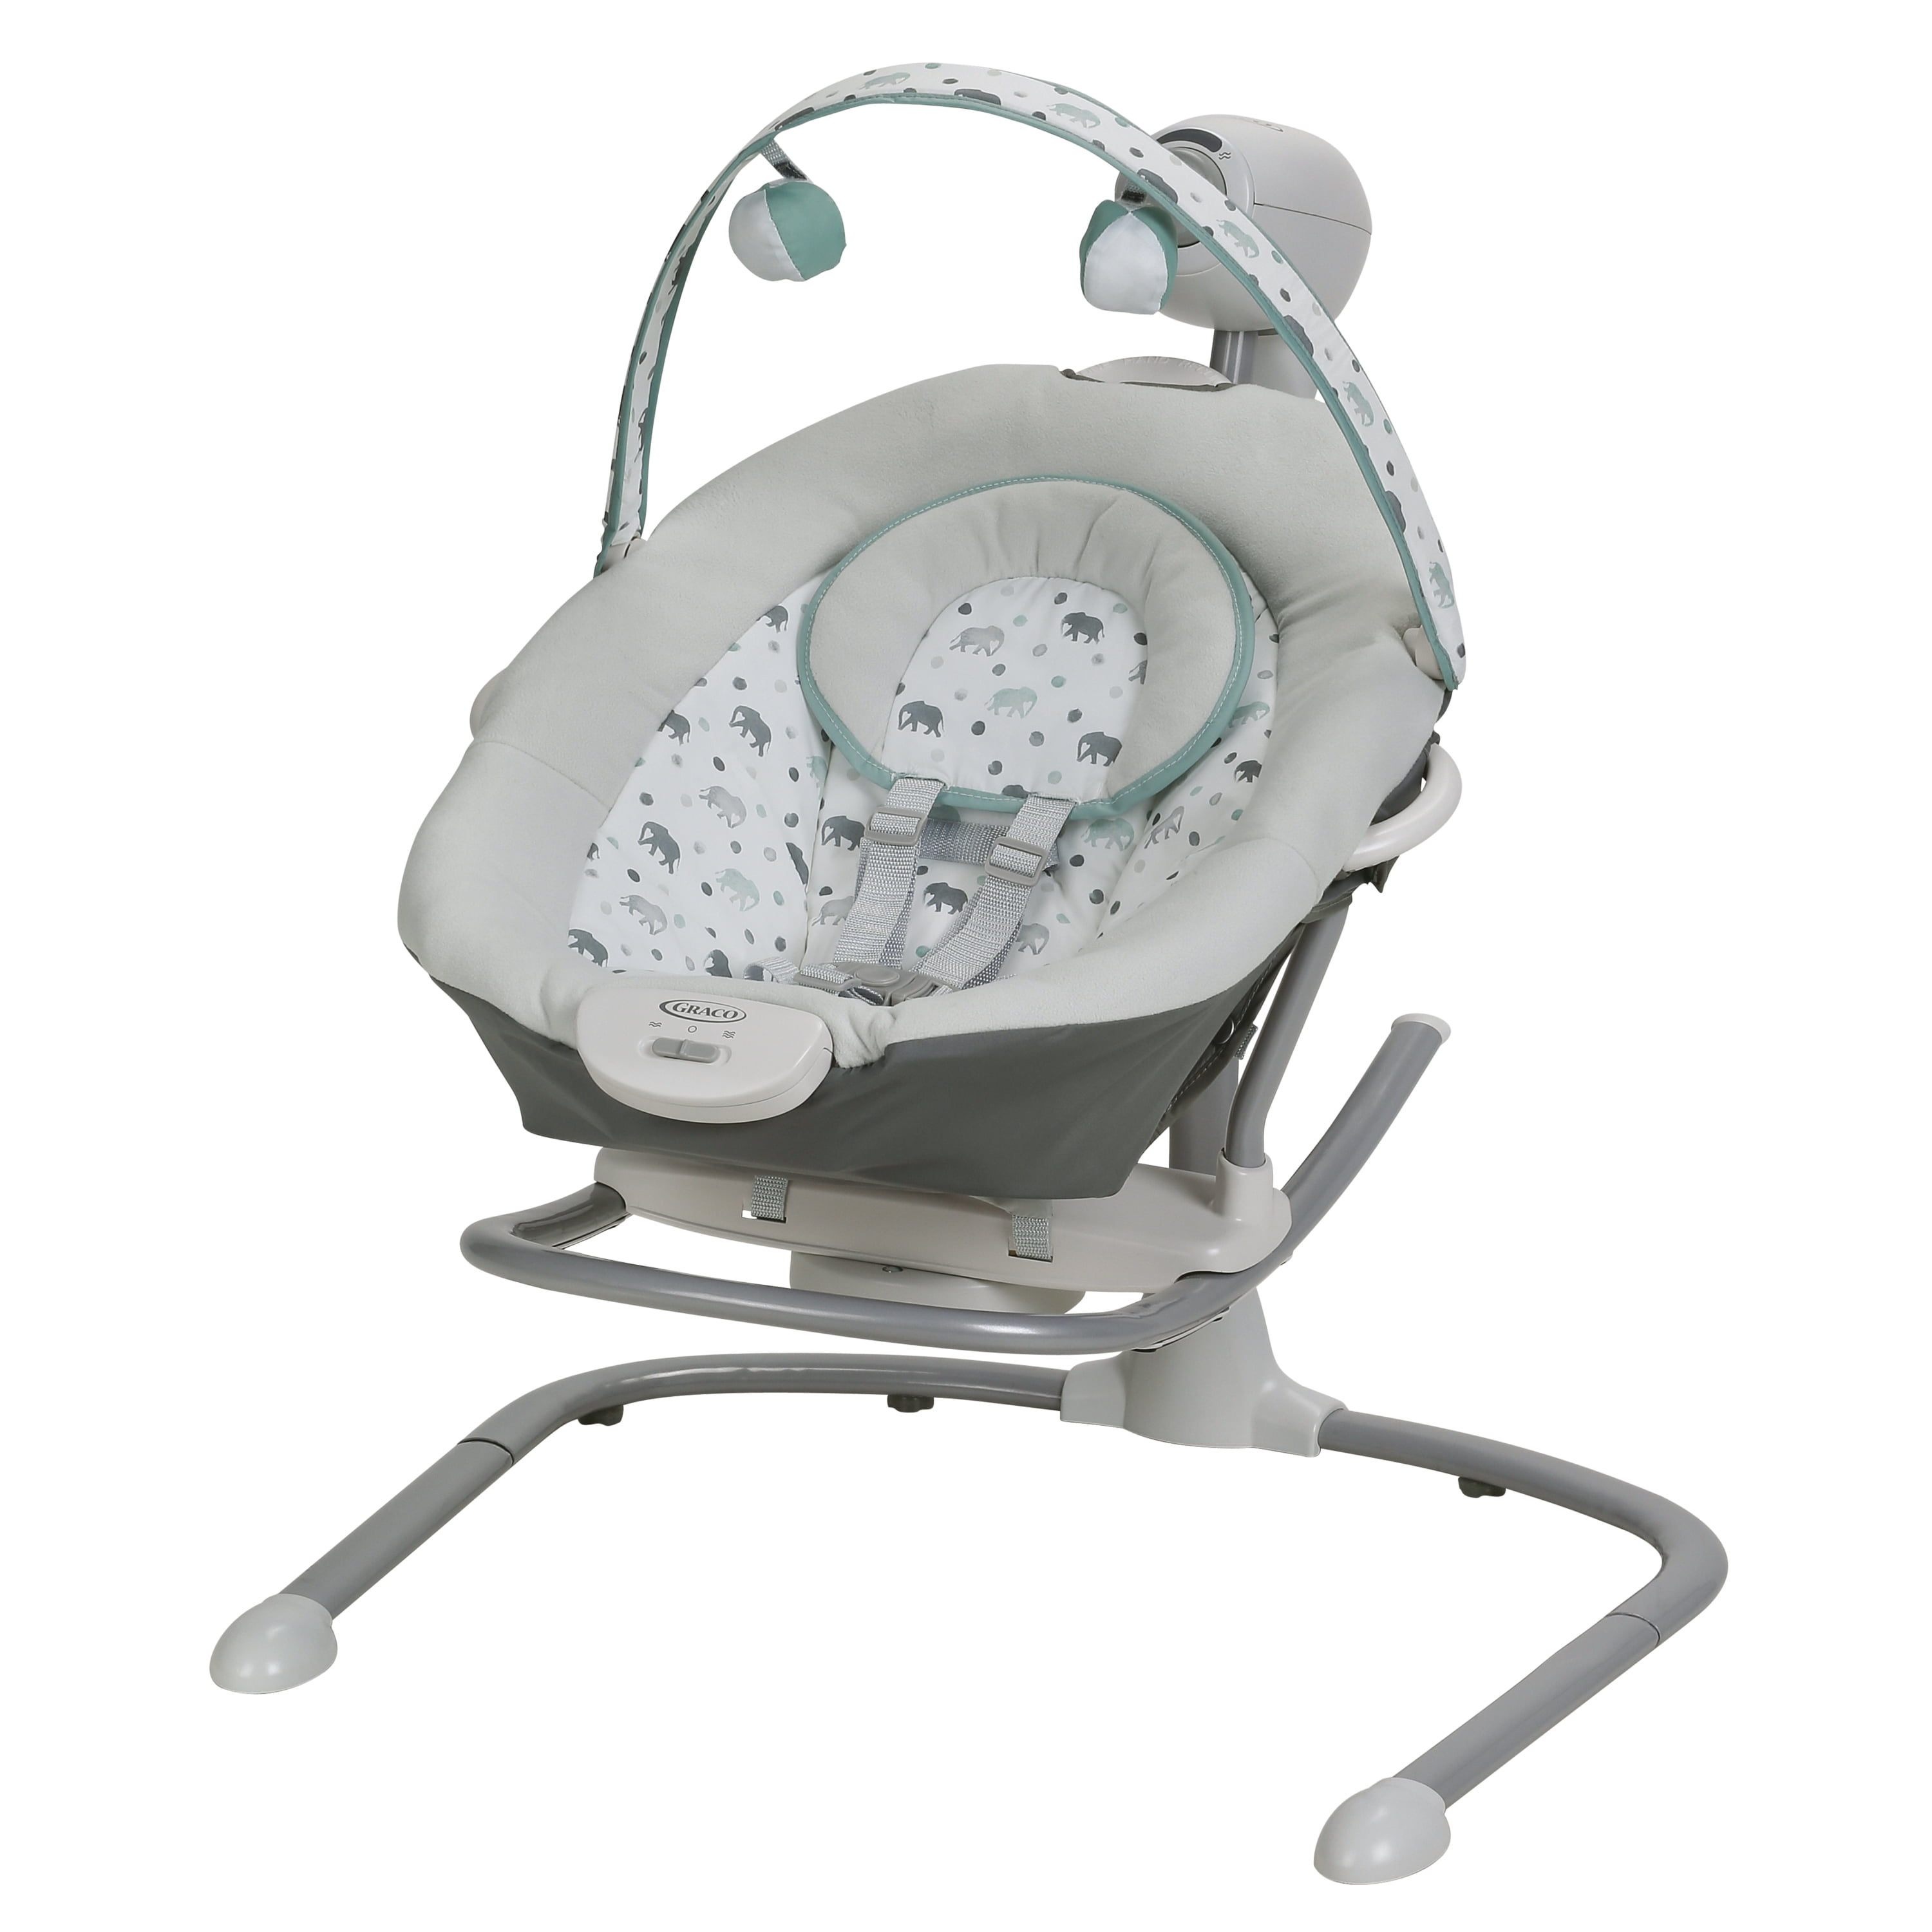 graco duet sway swing and portable rocker